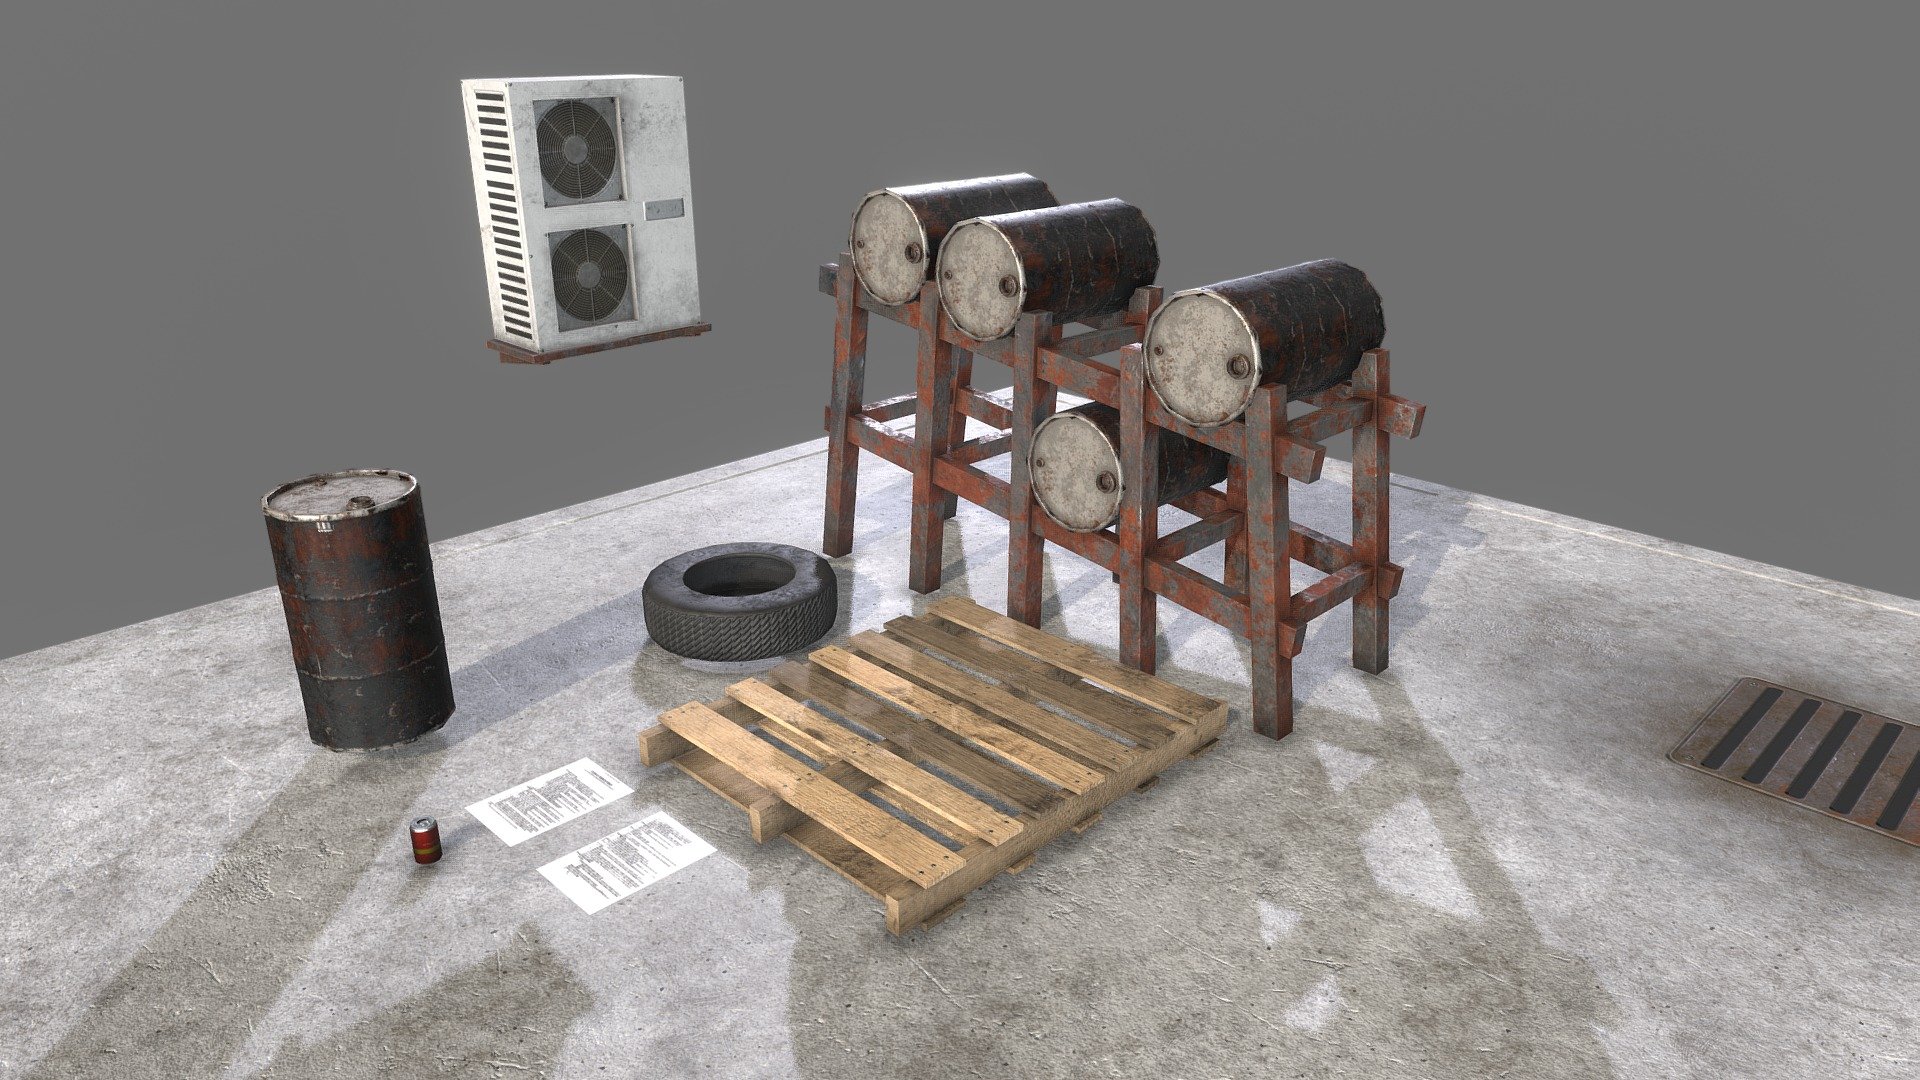 A Random Assortment of Abondoned Facory Assets I made for a Project. All assets are lowpoly enought to be game ready, and also have High Definition textures (4k and scaled down)

Assets:
1. Floor
2. Steel Barrel Holder
3. AC Unit
4. Pallet
5. Tire
6. Steel Drum Barrel
7. Beer Can
8. Papers (2 Version)

All Assets and Textures are available for Freeeeeeeeeeee. If wanted I also have extra Varieties of the Barrel Textures, the one Features is a standard blakc one but I also have Yellow and Red Toxic versions, and a Radioactive Waste Version as well.

Enyoy,
            Lum 3d model